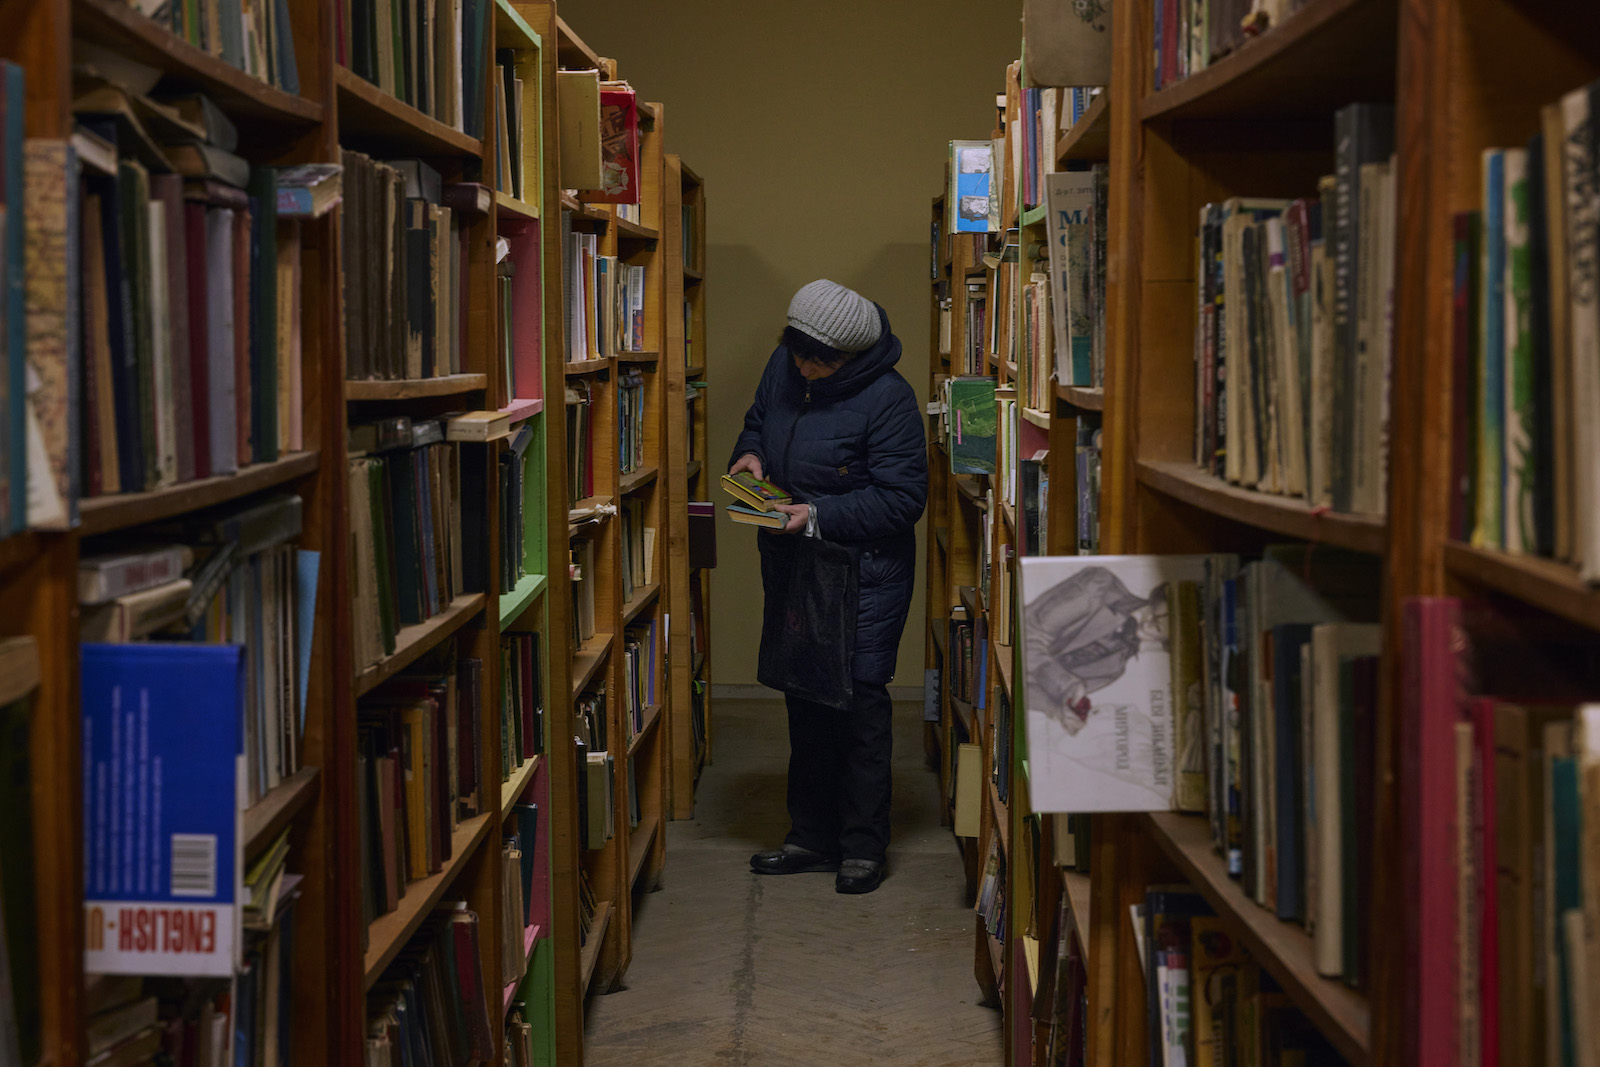 A woman in a gray hat and blue down coat holds books in an aisle between two walls of wooden bookshelves